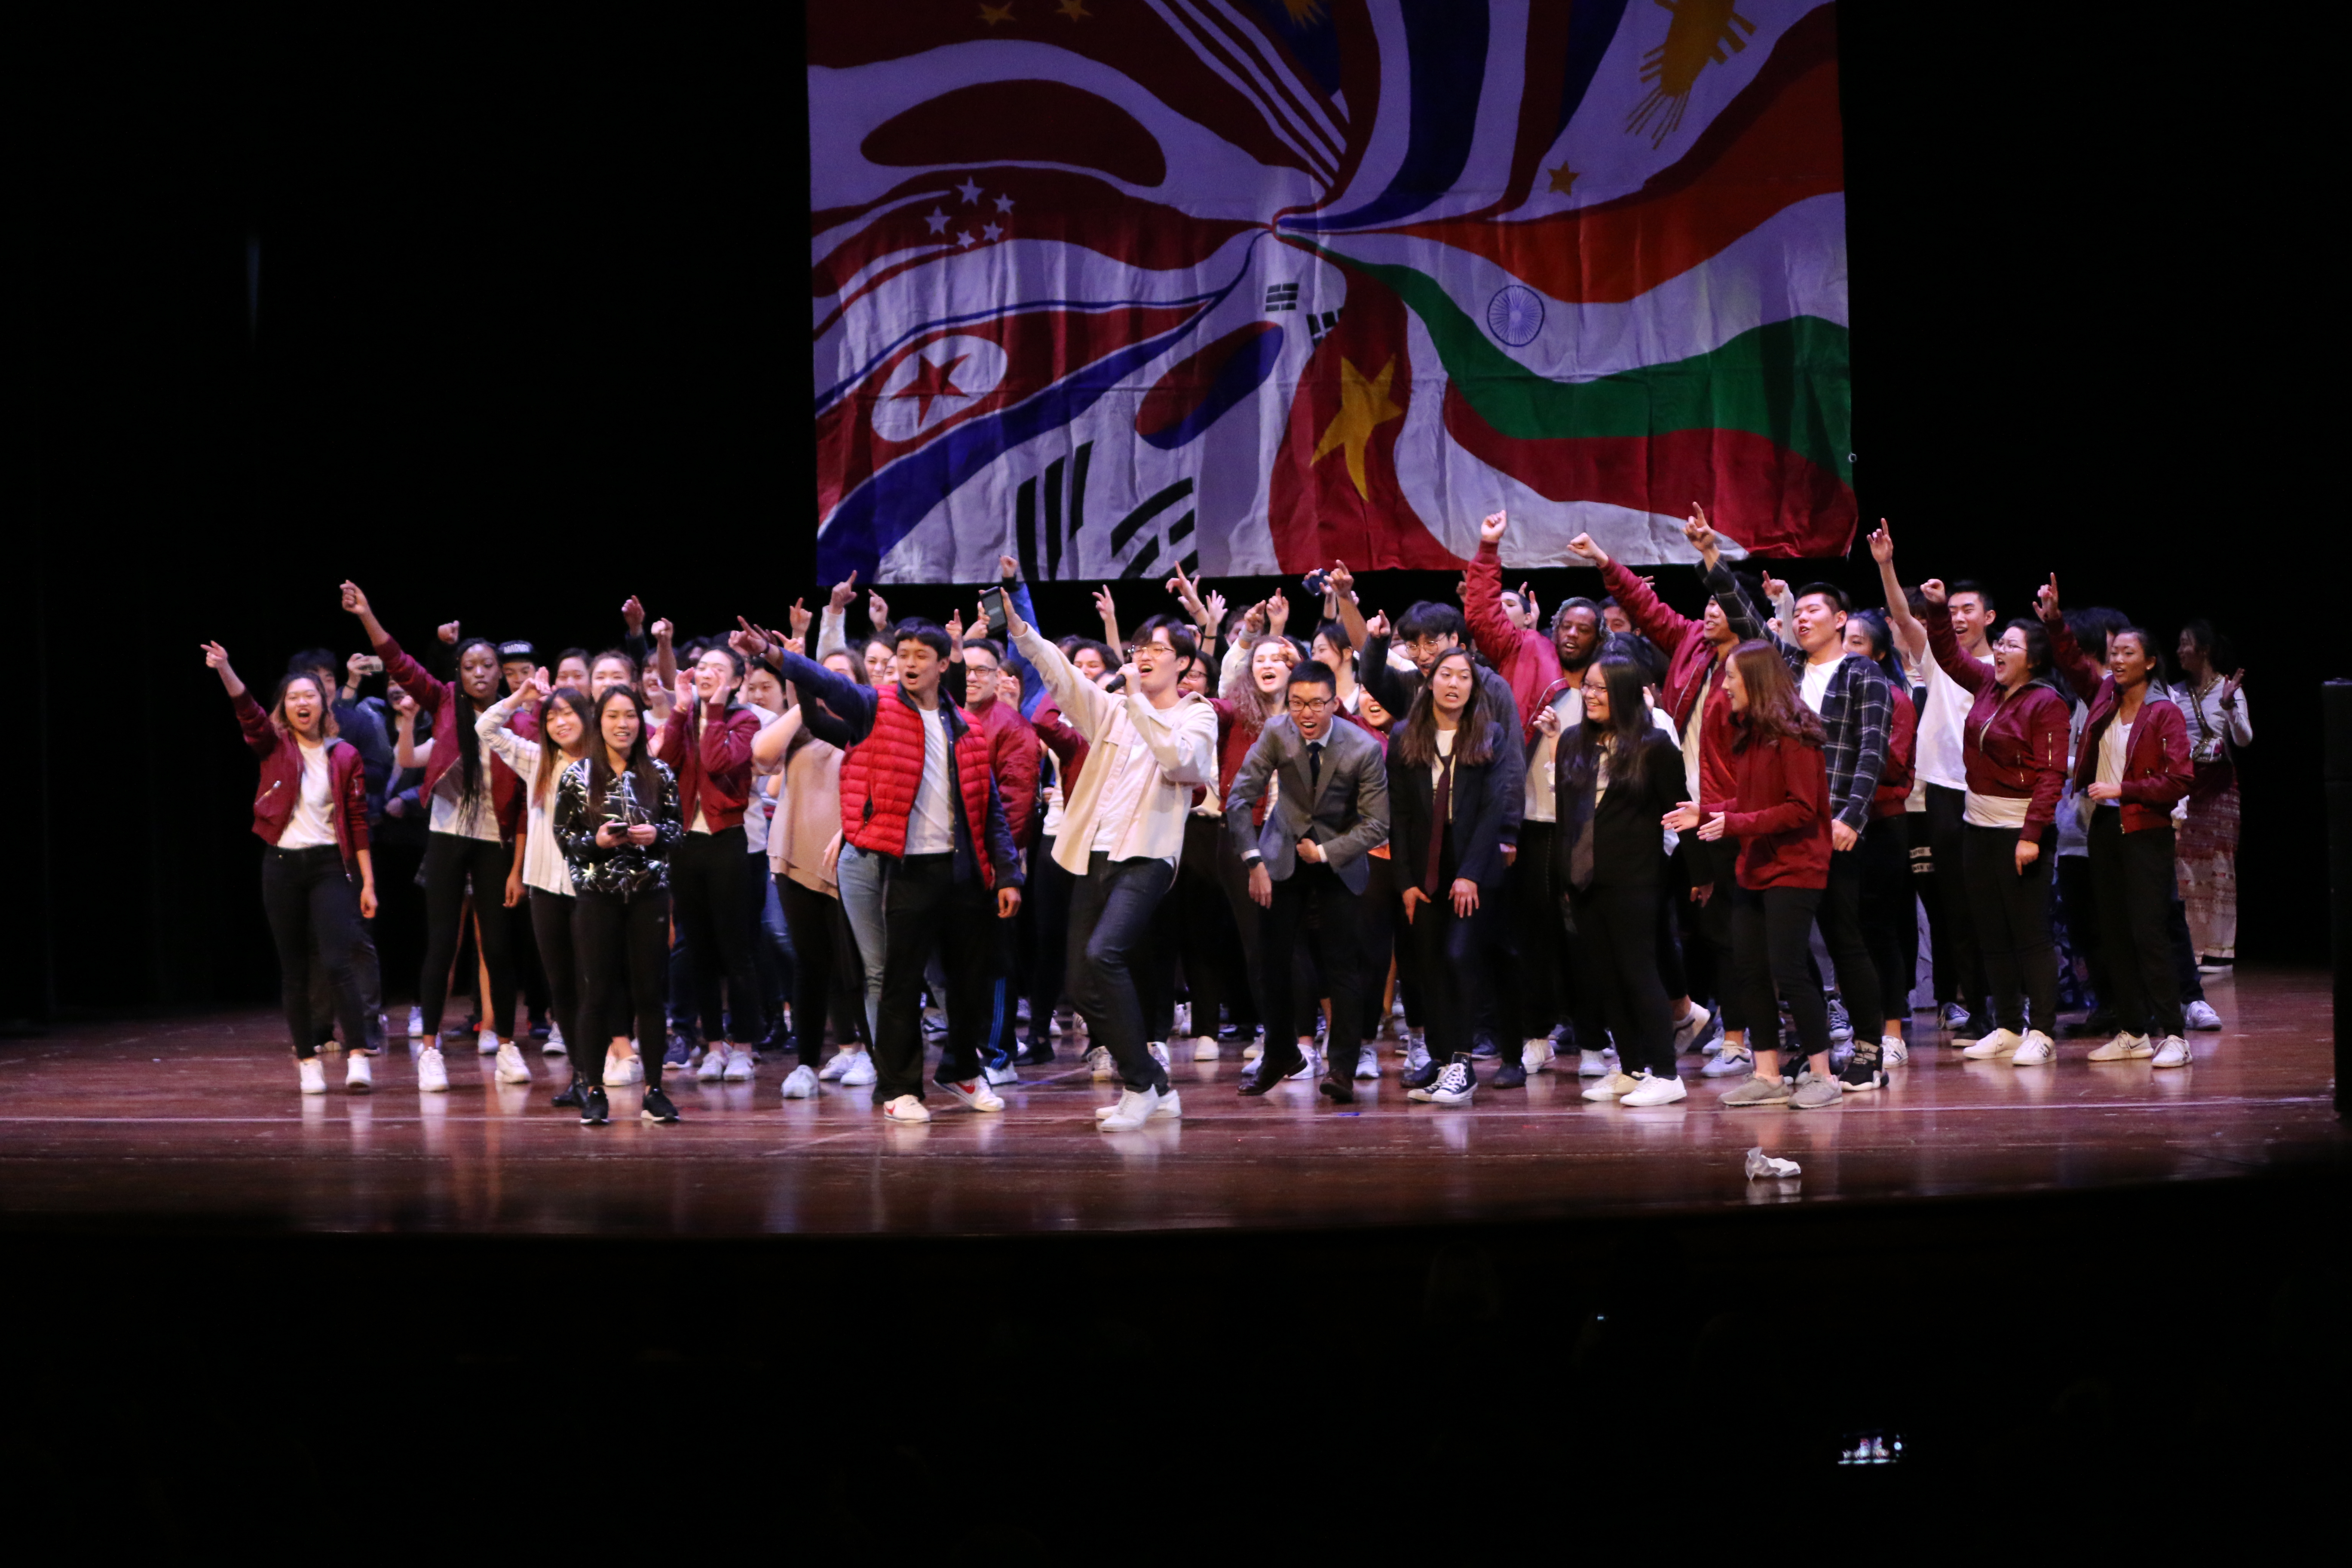 Students in the Fusion dance organization perform